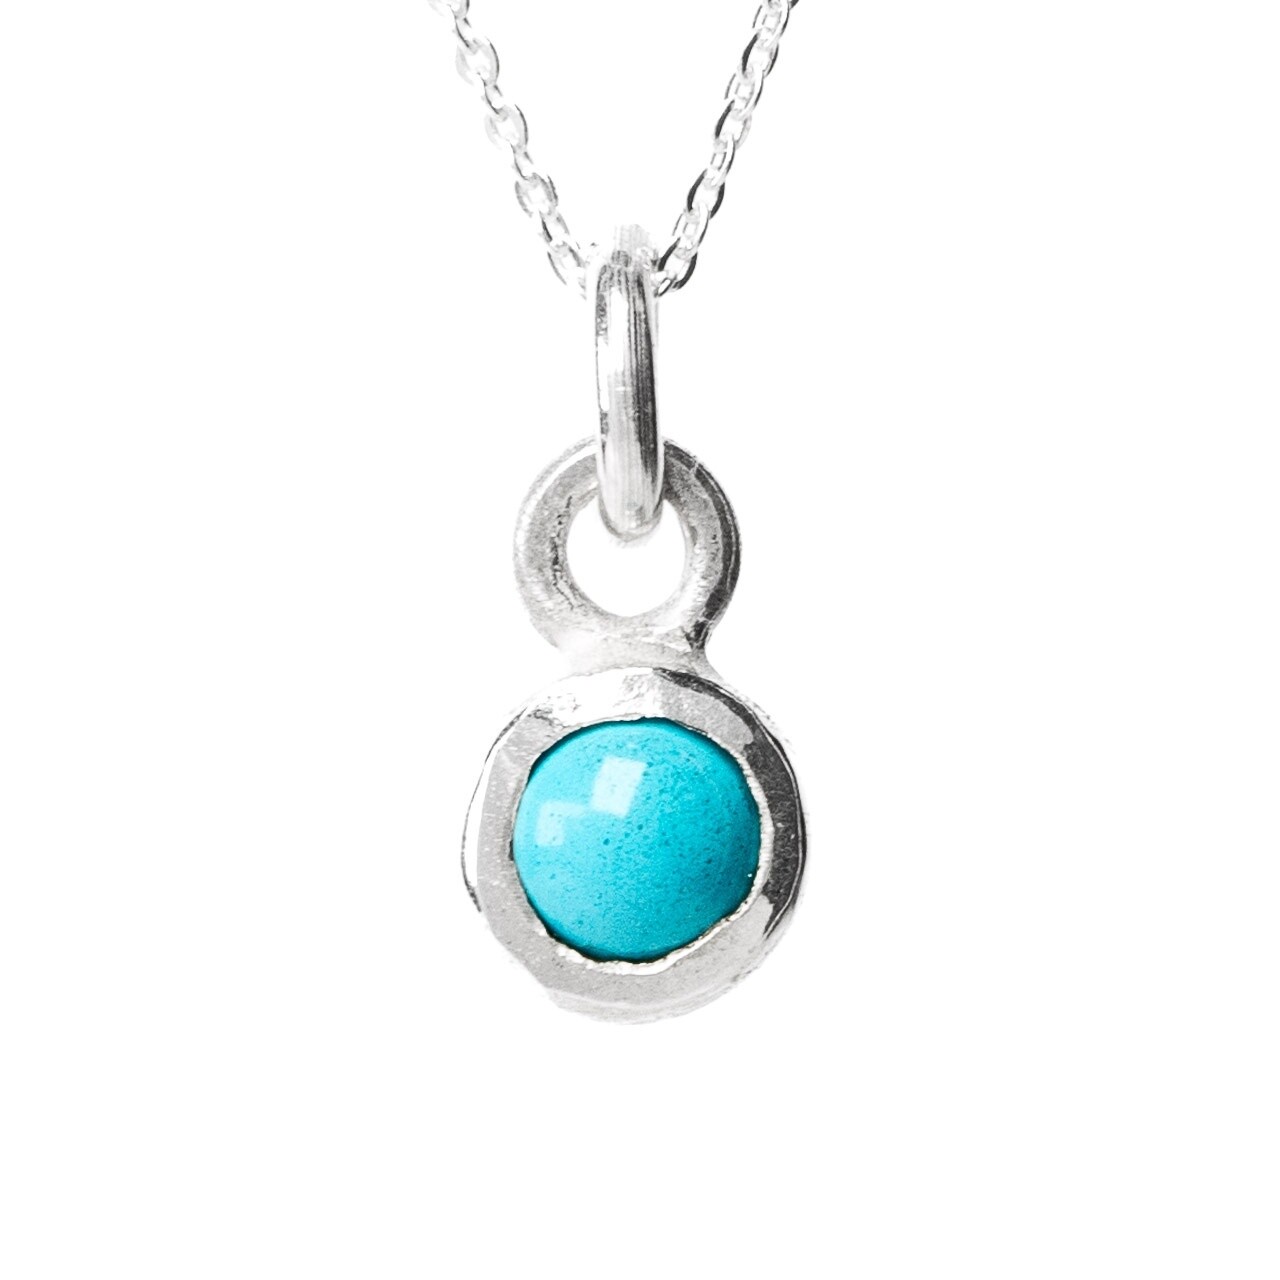 Turquoise Charm Pendant by Fi Mehra